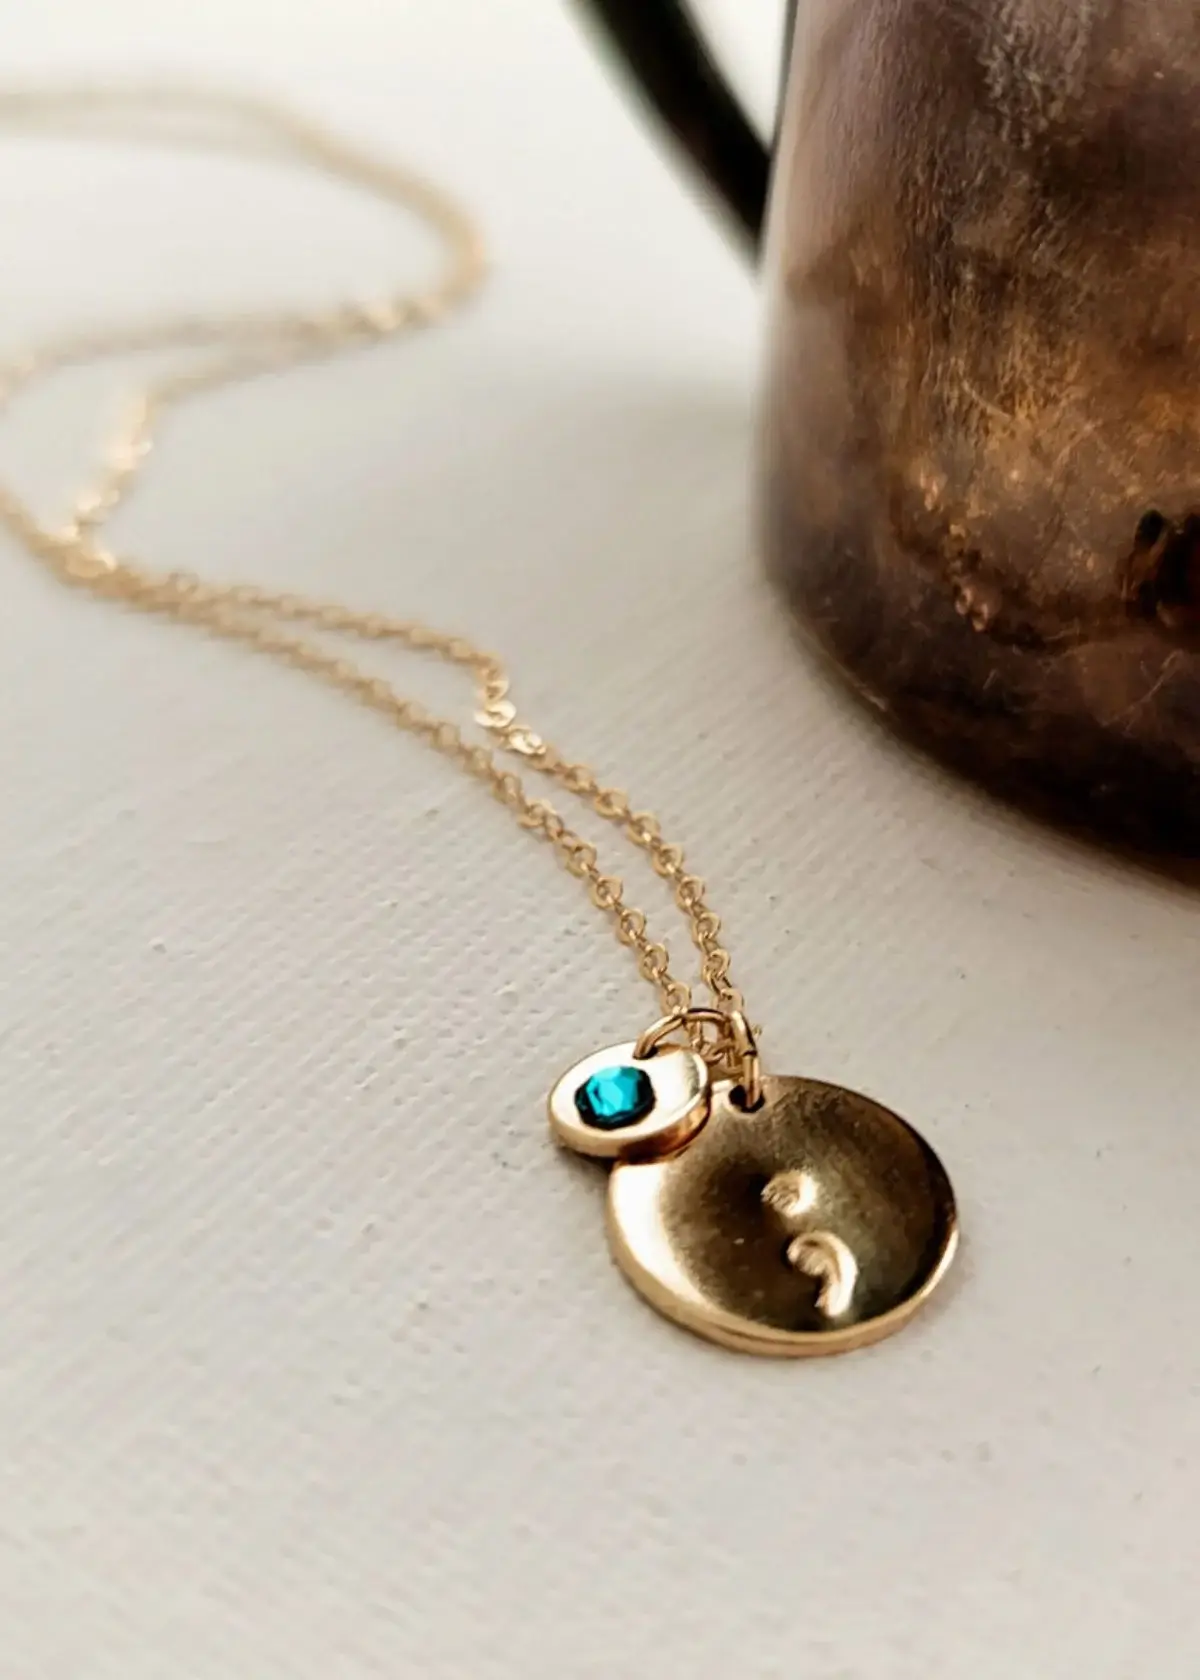 What is a Semicolon Necklace?